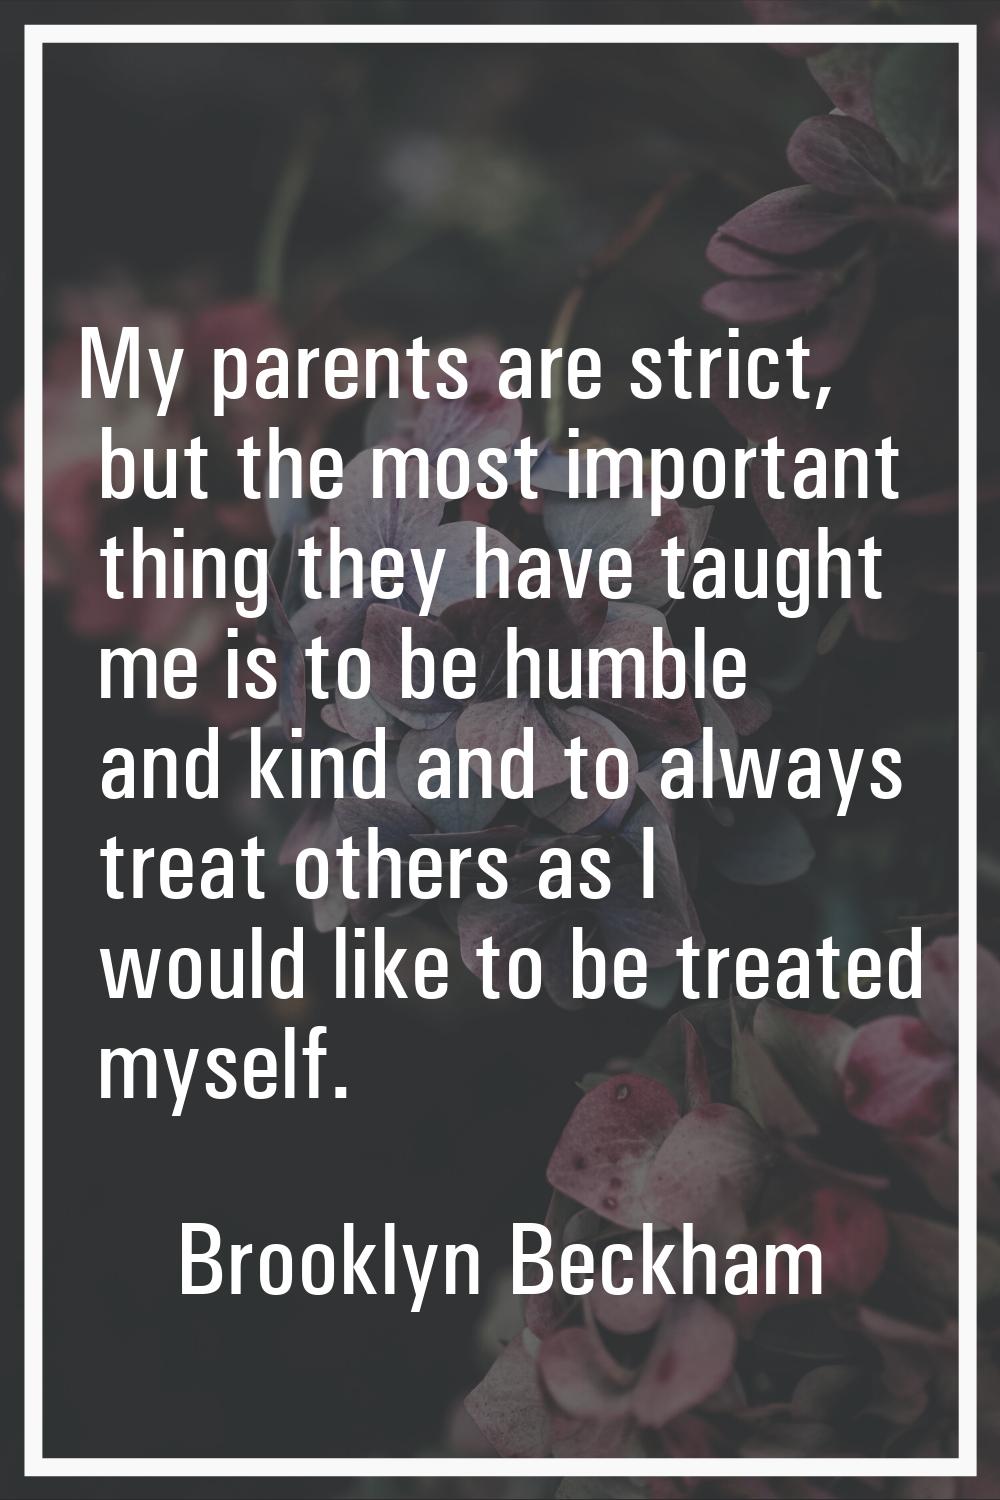 My parents are strict, but the most important thing they have taught me is to be humble and kind an